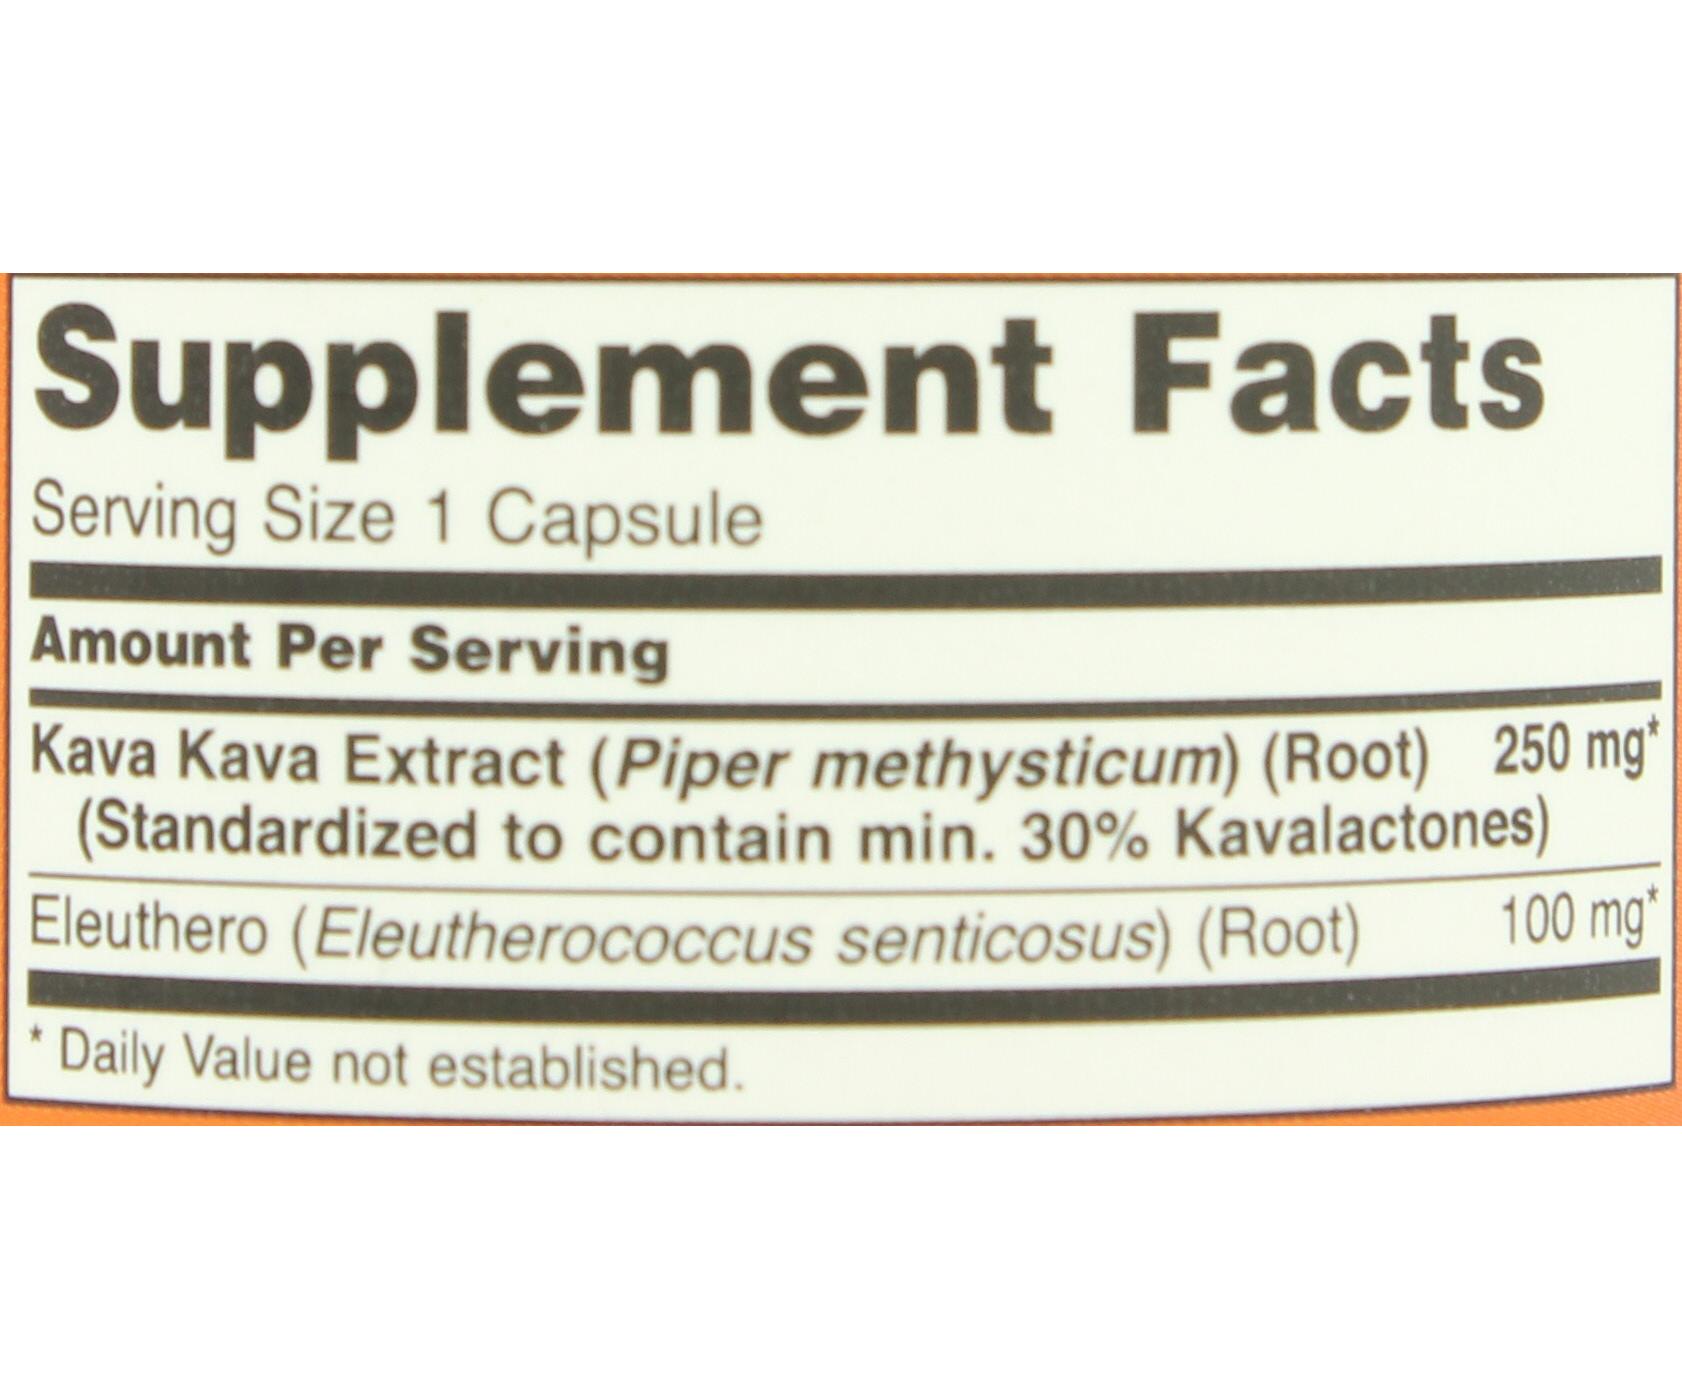 NOW Kava Kava Extract 250 mg Capsules; image 2 of 2